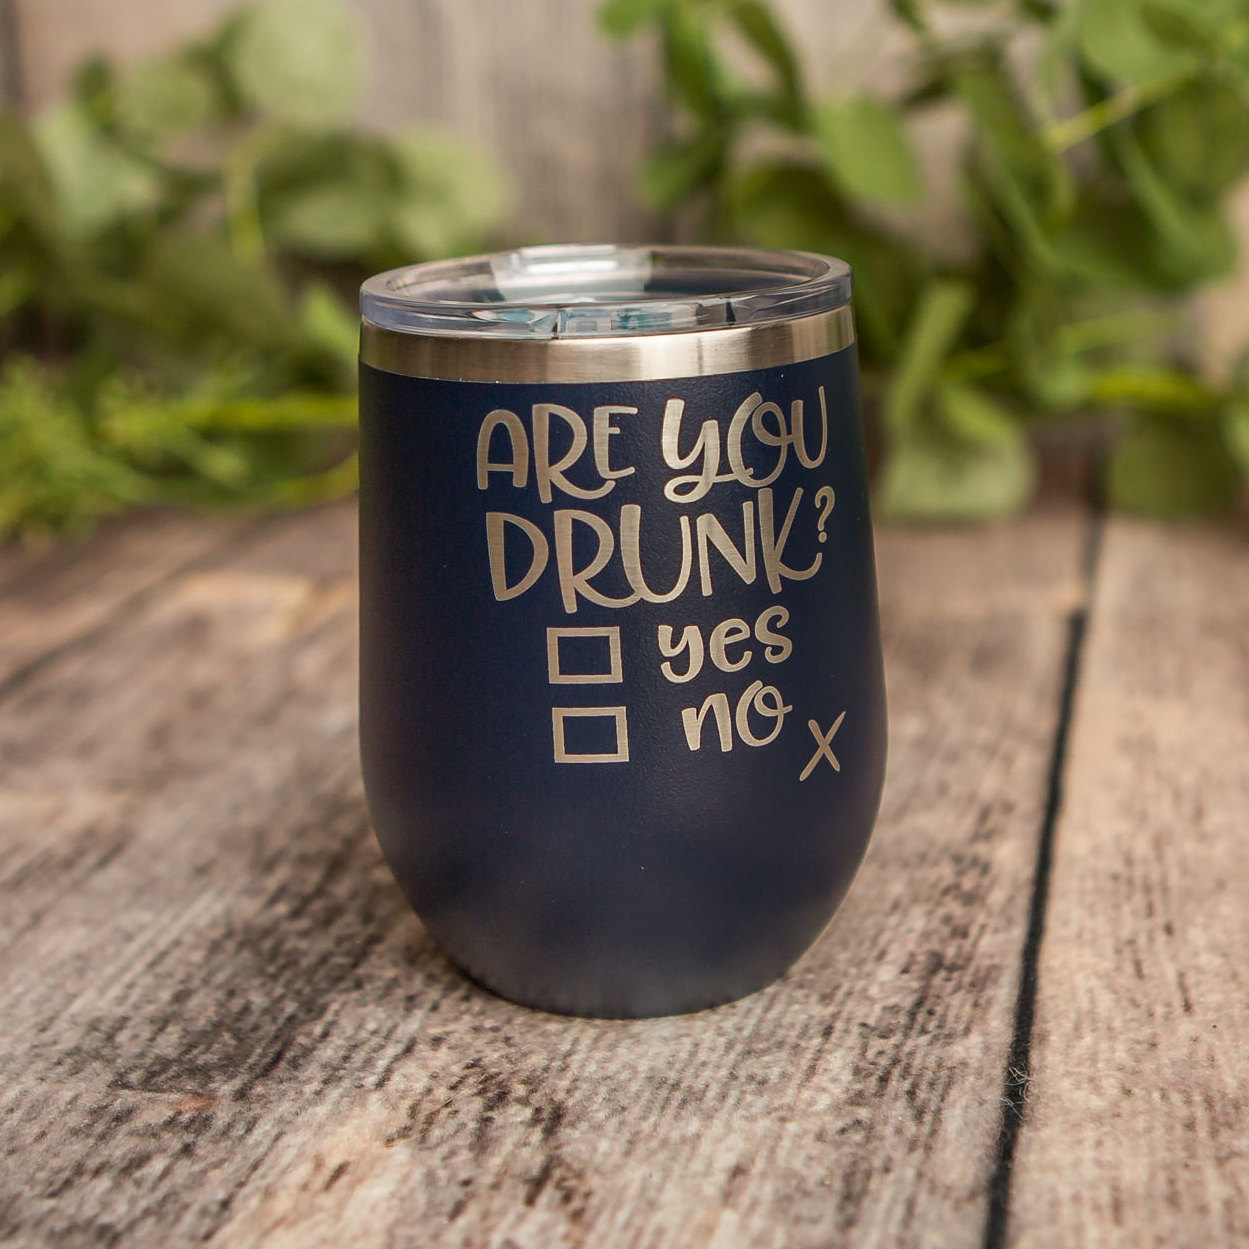 https://3cetching.com/wp-content/uploads/2020/09/are-you-drunk-engraved-wine-tumbler-vacuum-insulated-tumbler-party-favor-gift-mug-5f5fa6ef.jpg